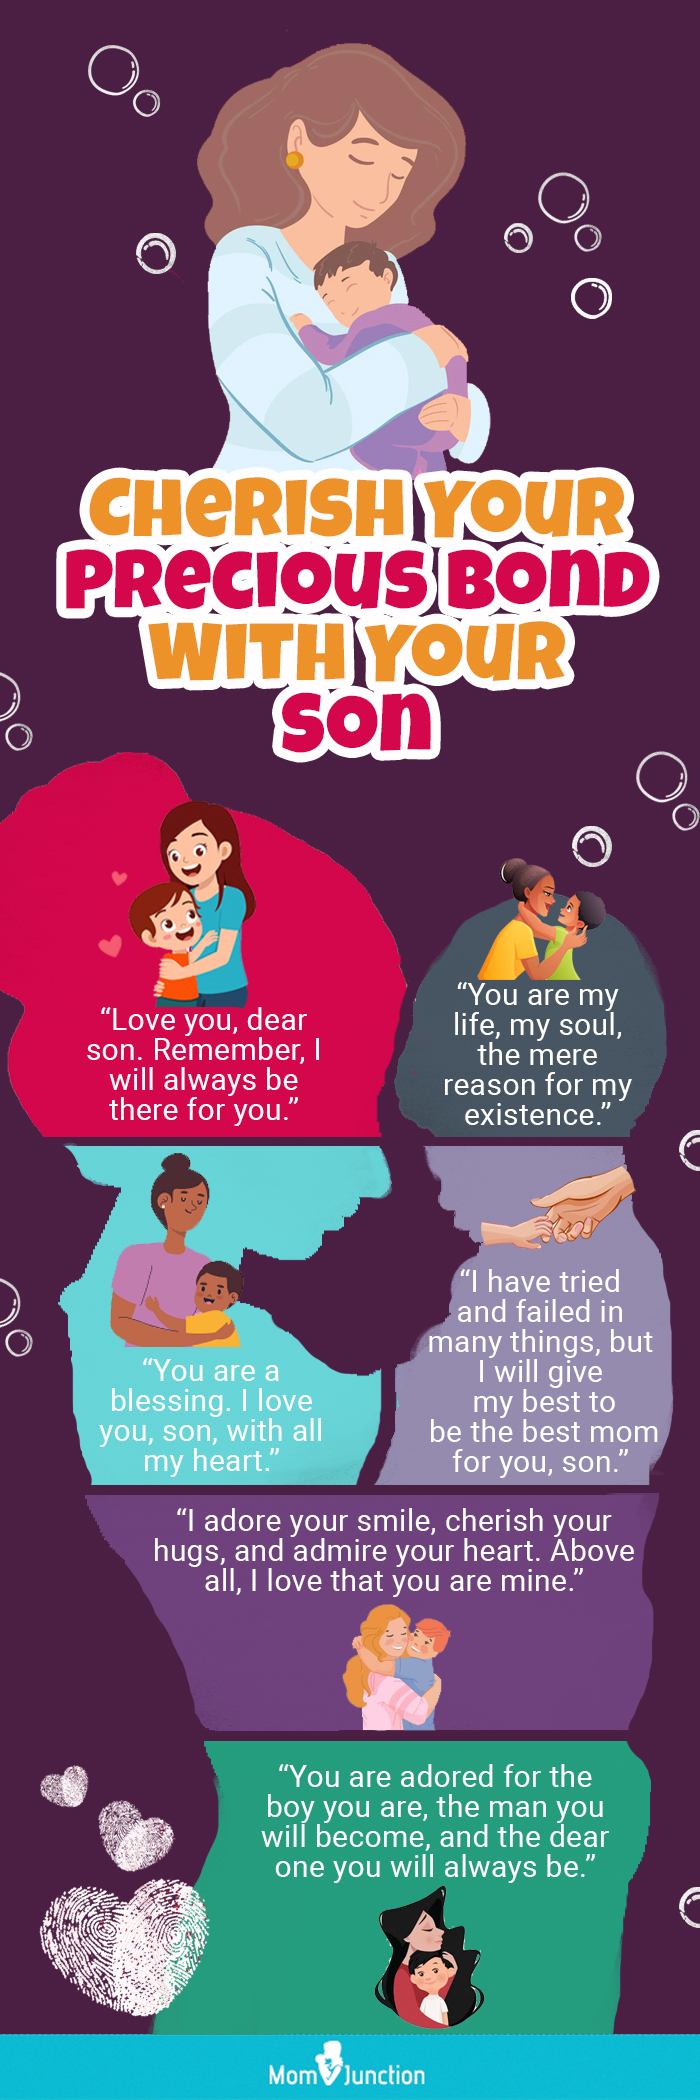 https://www.momjunction.com/wp-content/uploads/2022/11/Cherish-Your-Precious-Bond-With-Your-Son.jpg